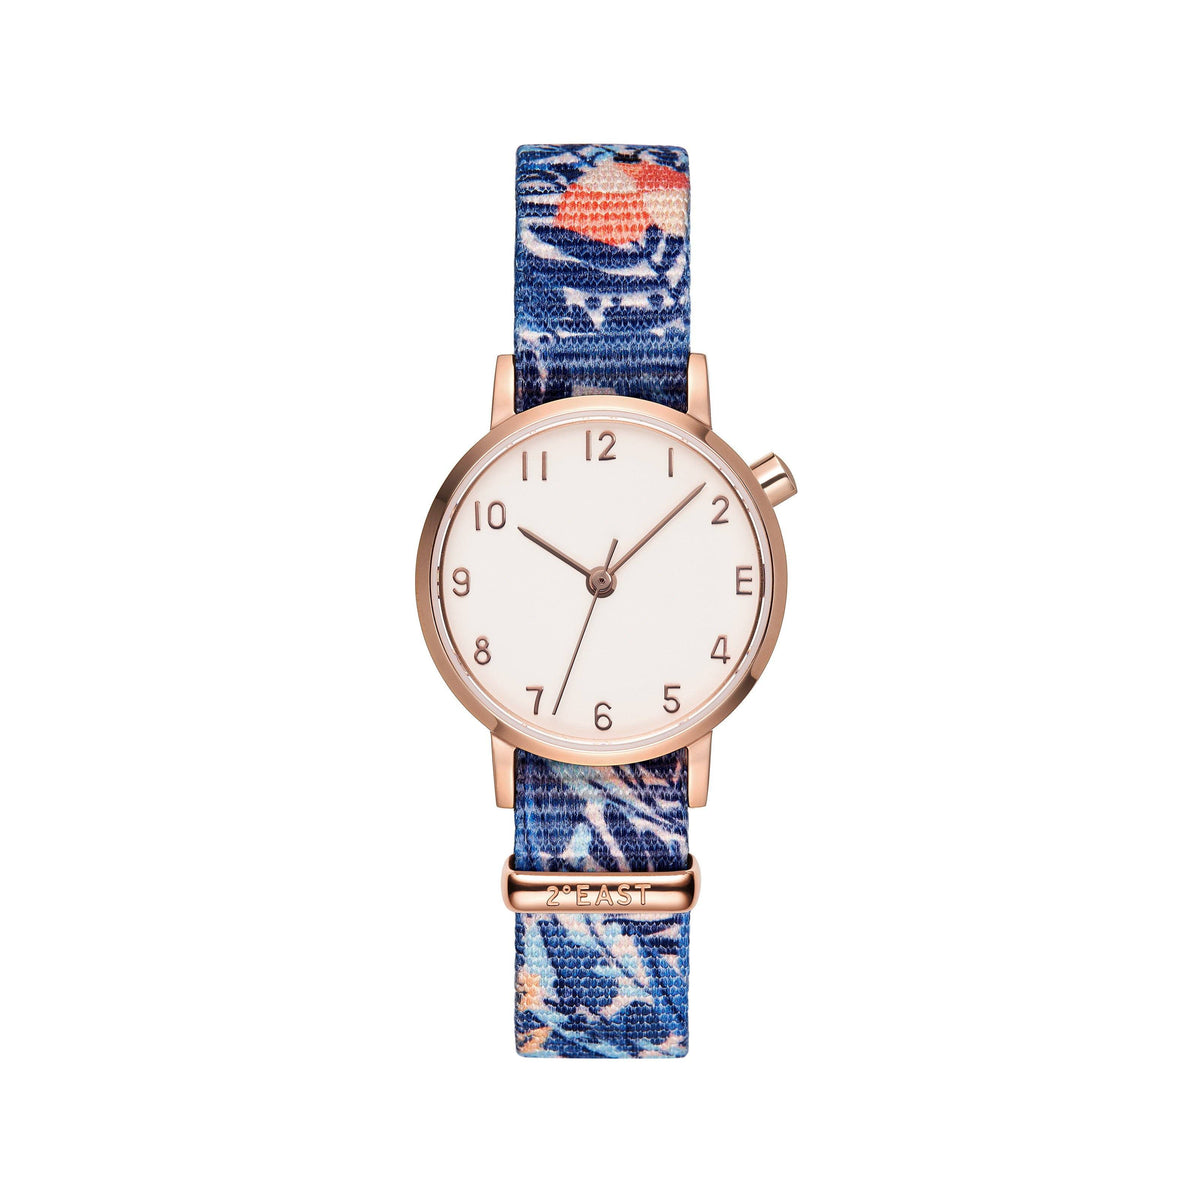 The White and Rose Gold Watch - Butterfly (Kids)